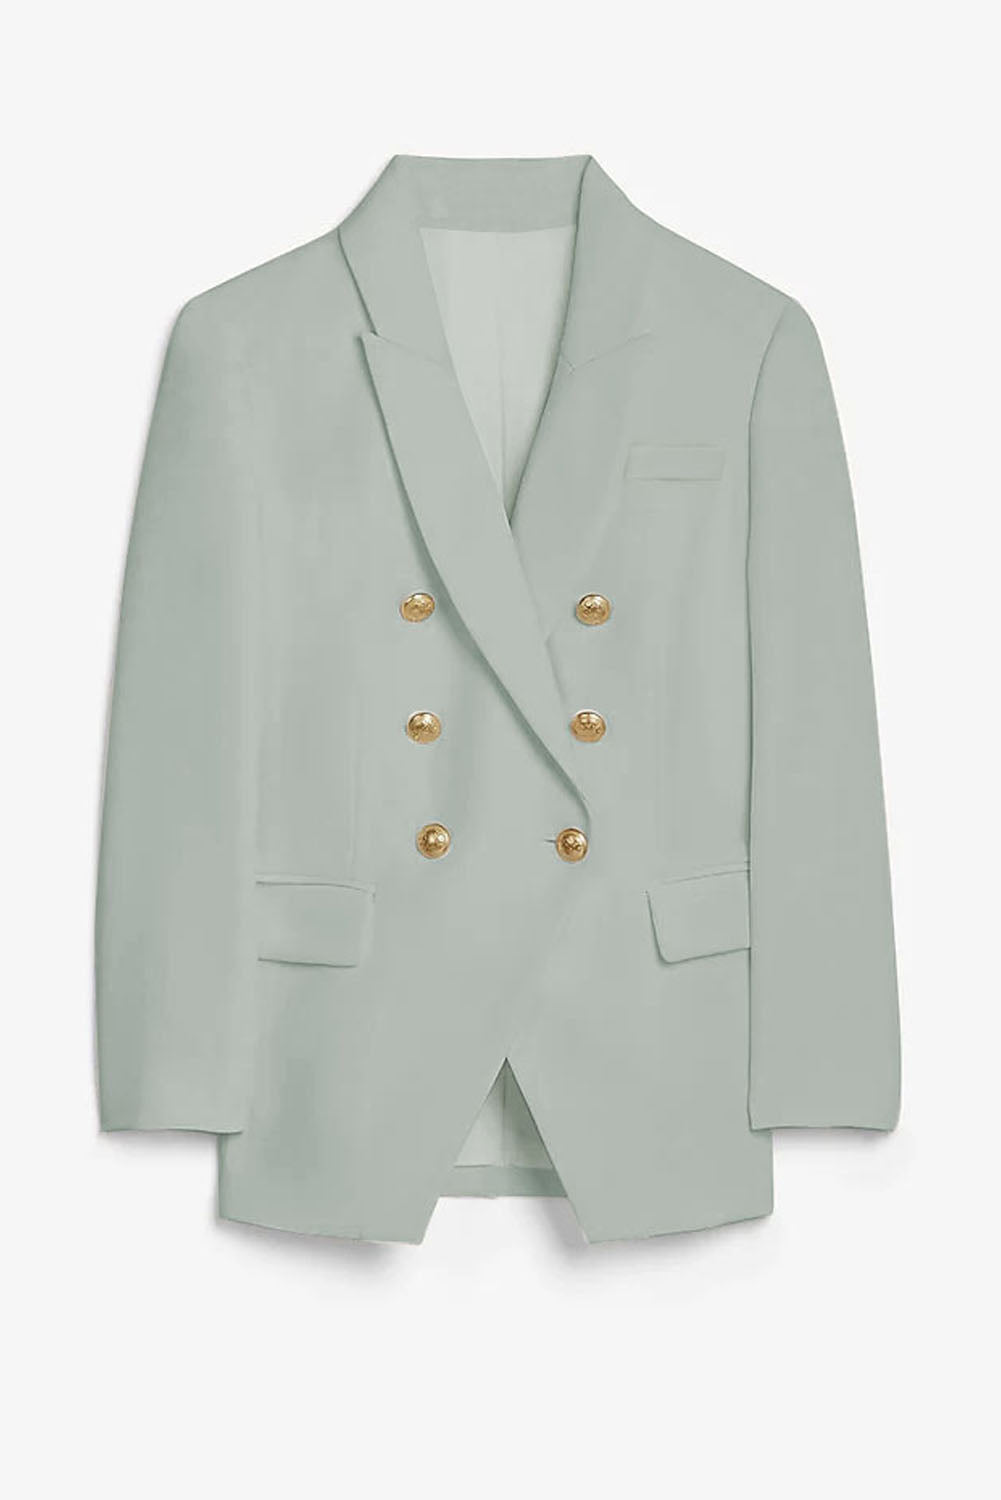 LC852446-9-S, LC852446-9-M, LC852446-9-L, LC852446-9-XL, LC852446-9-2XL, Green Womens Lapel Button Work Jackets Draped Open Front Work Suit